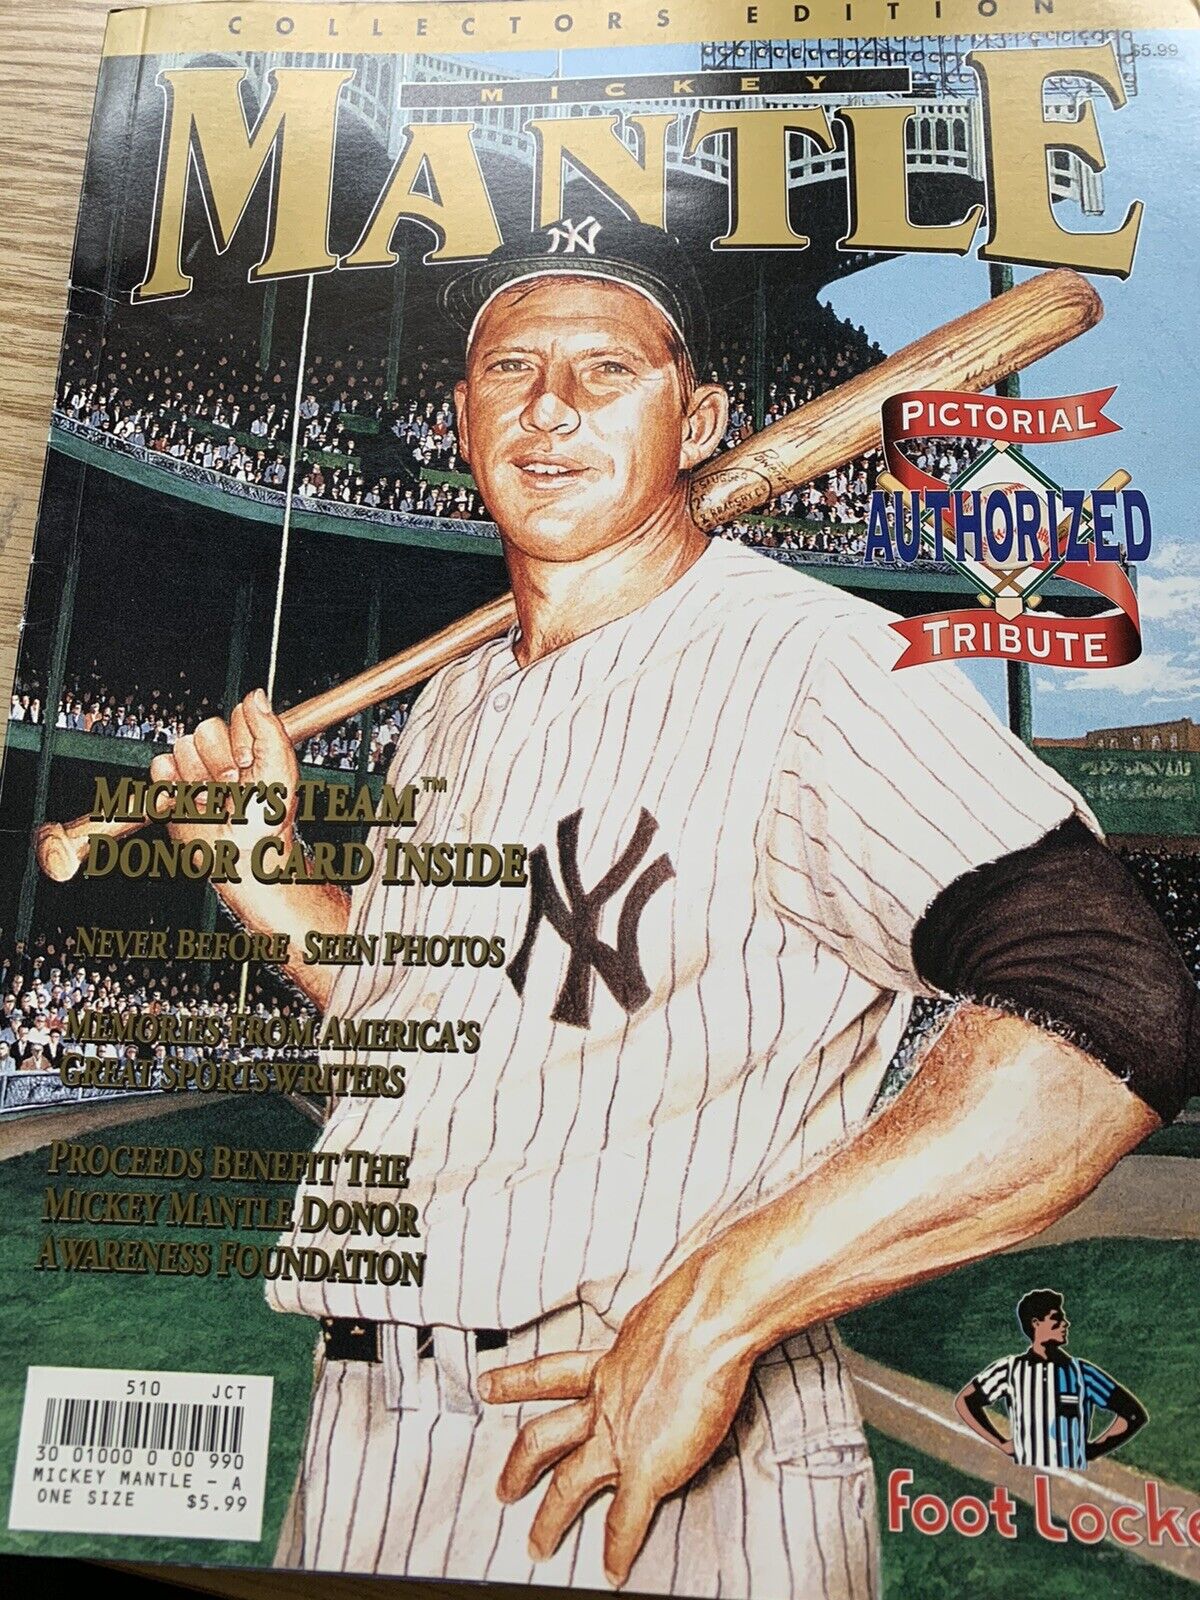 Mickey Mantle Pictorial Authorized Tribute 1931 1995 MLB New York Yankees VG-EX